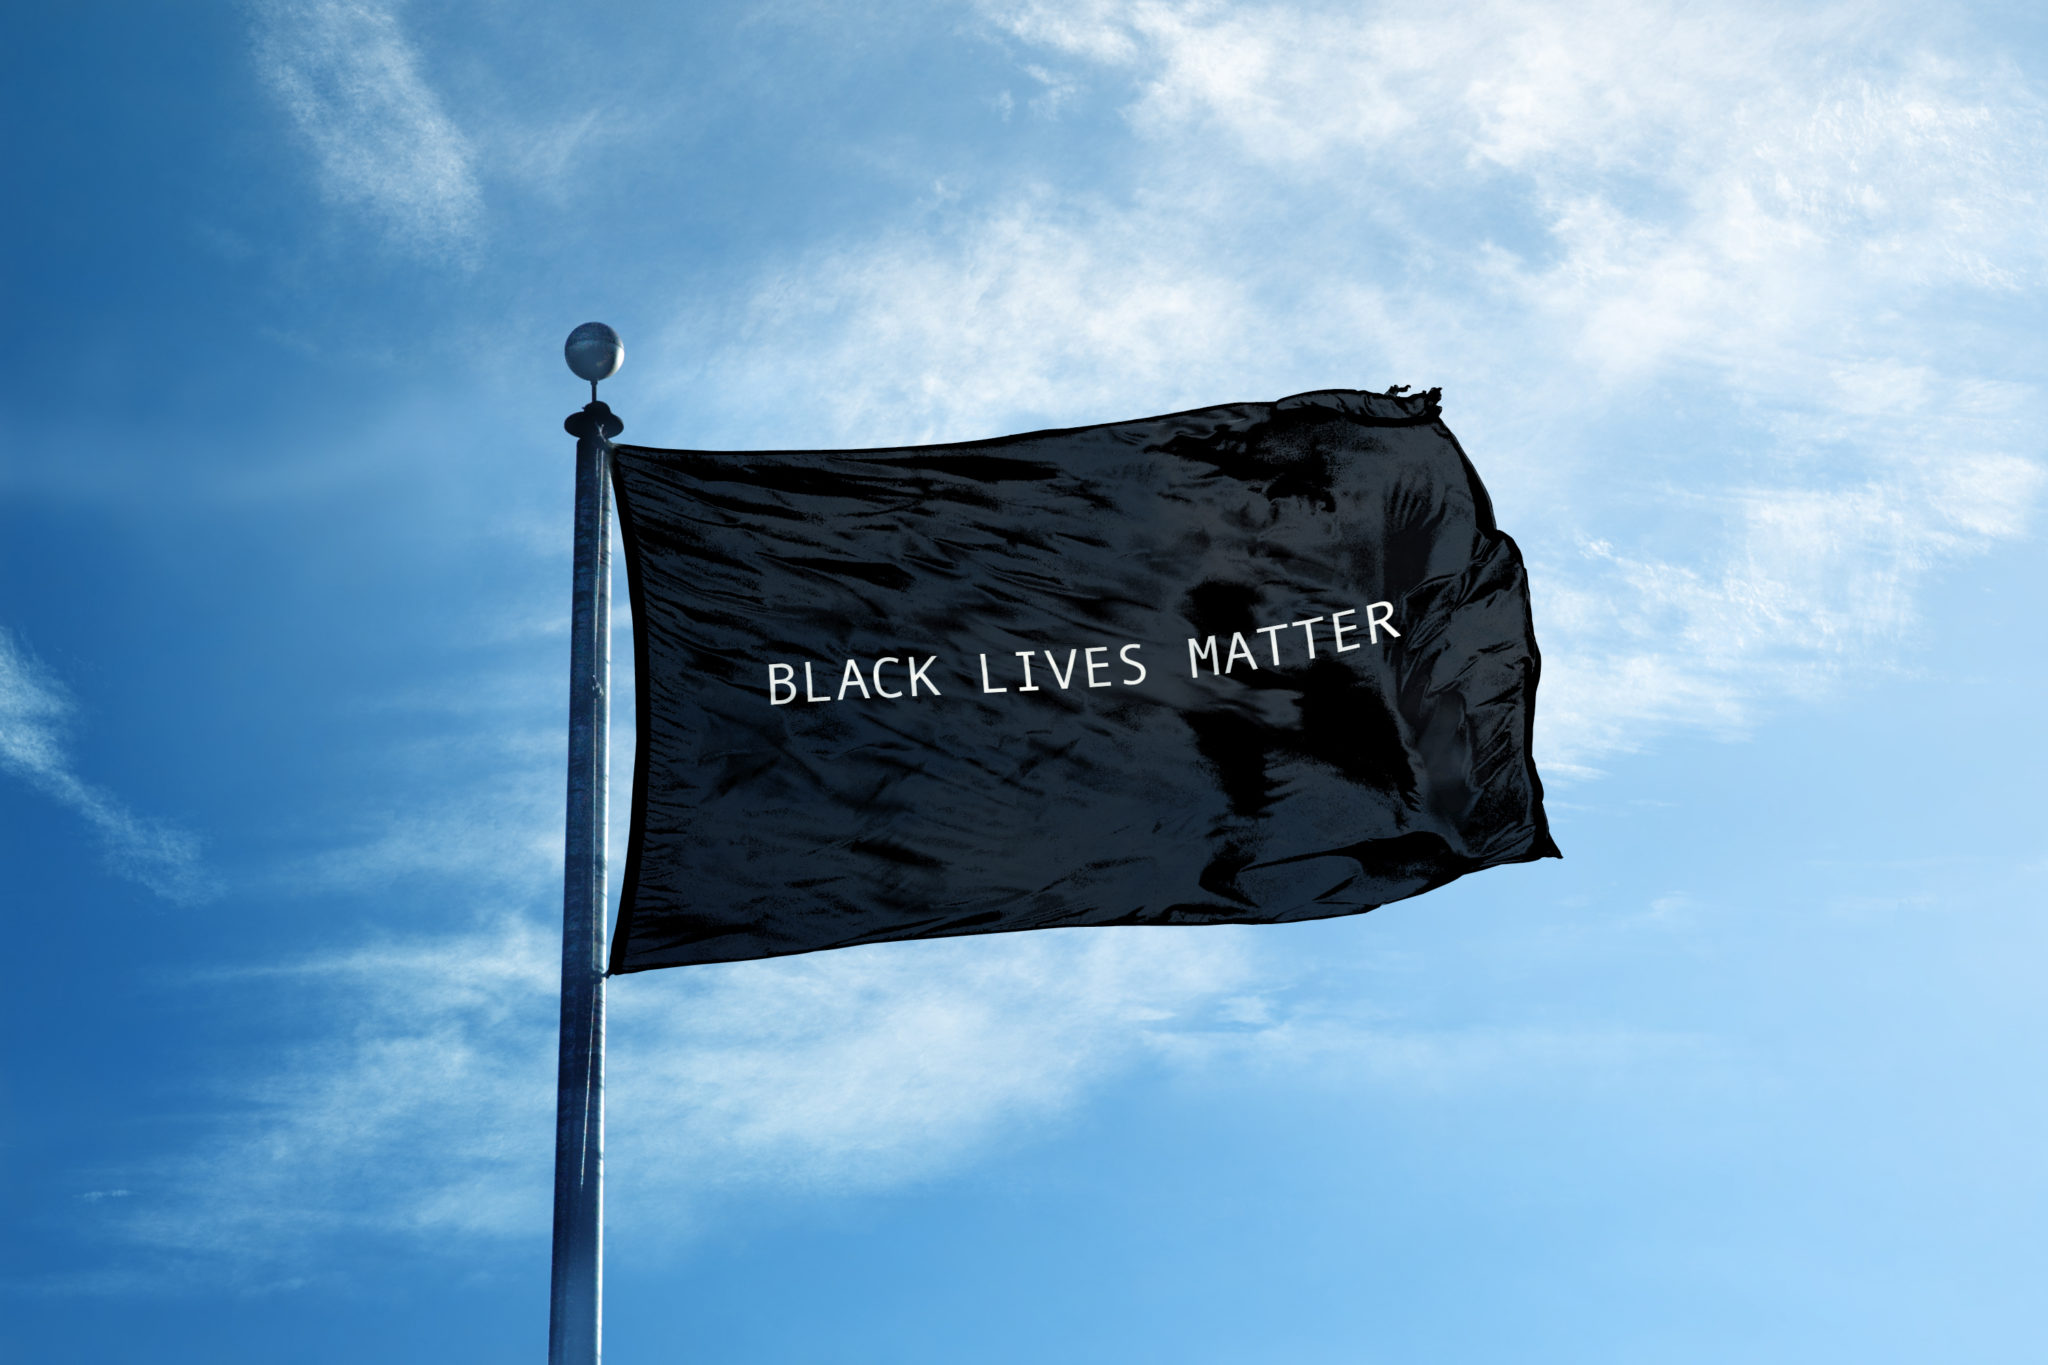 The hemp industry needs to take a stand for black lives. Photo: A Black Lives Matter flag on a flag pole against a partly cloudy blue sky.